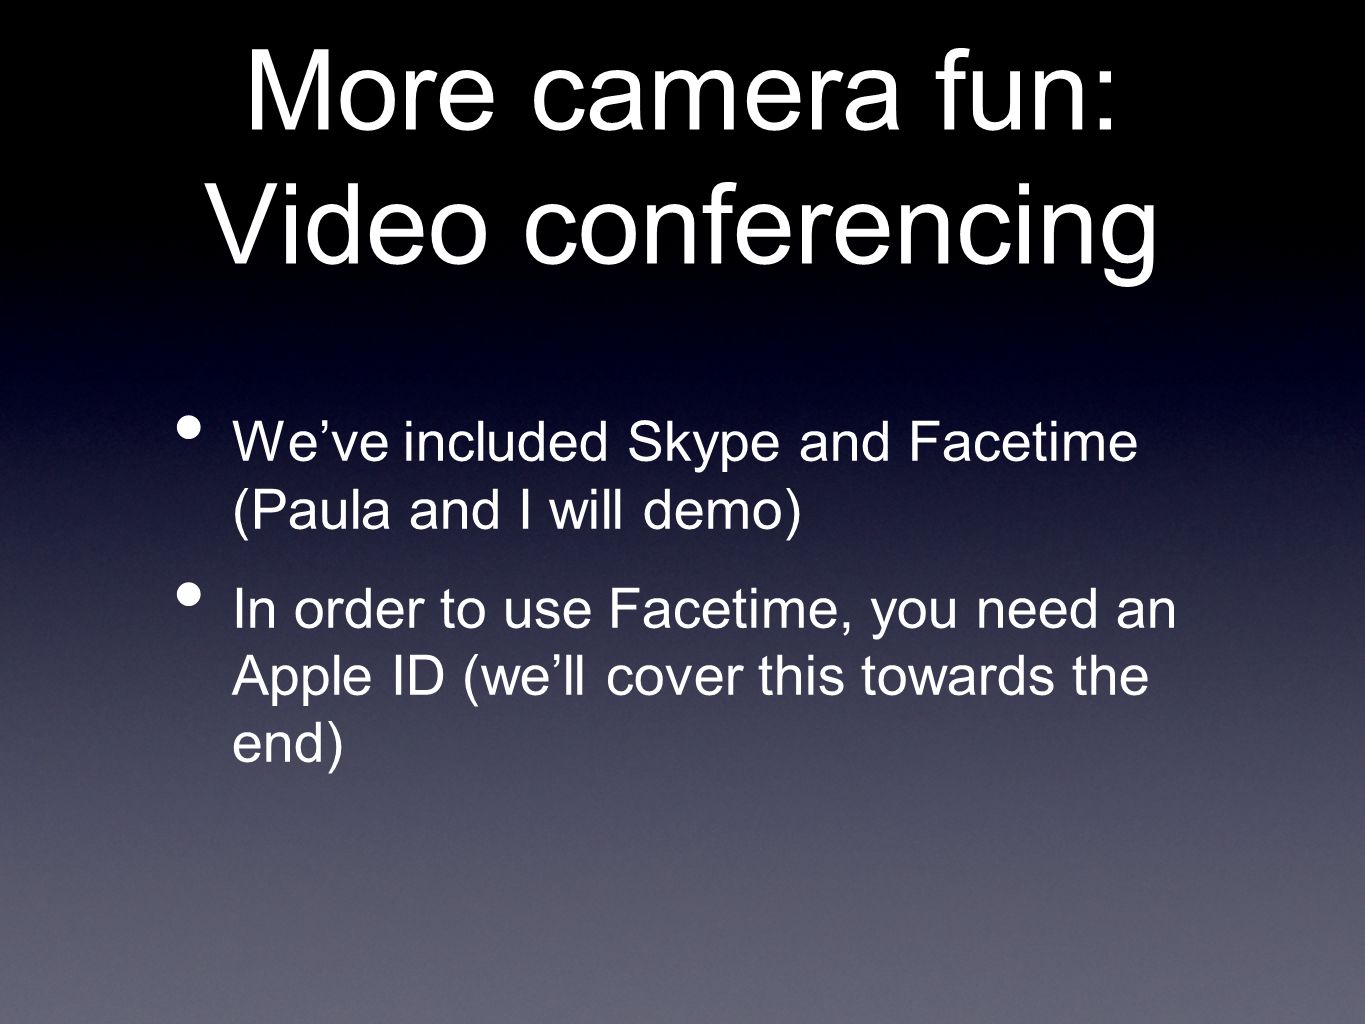 More camera fun: Video conferencing We’ve included Skype and Facetime (Paula and I will demo) In order to use Facetime, you need an Apple ID (we’ll cover this towards the end)